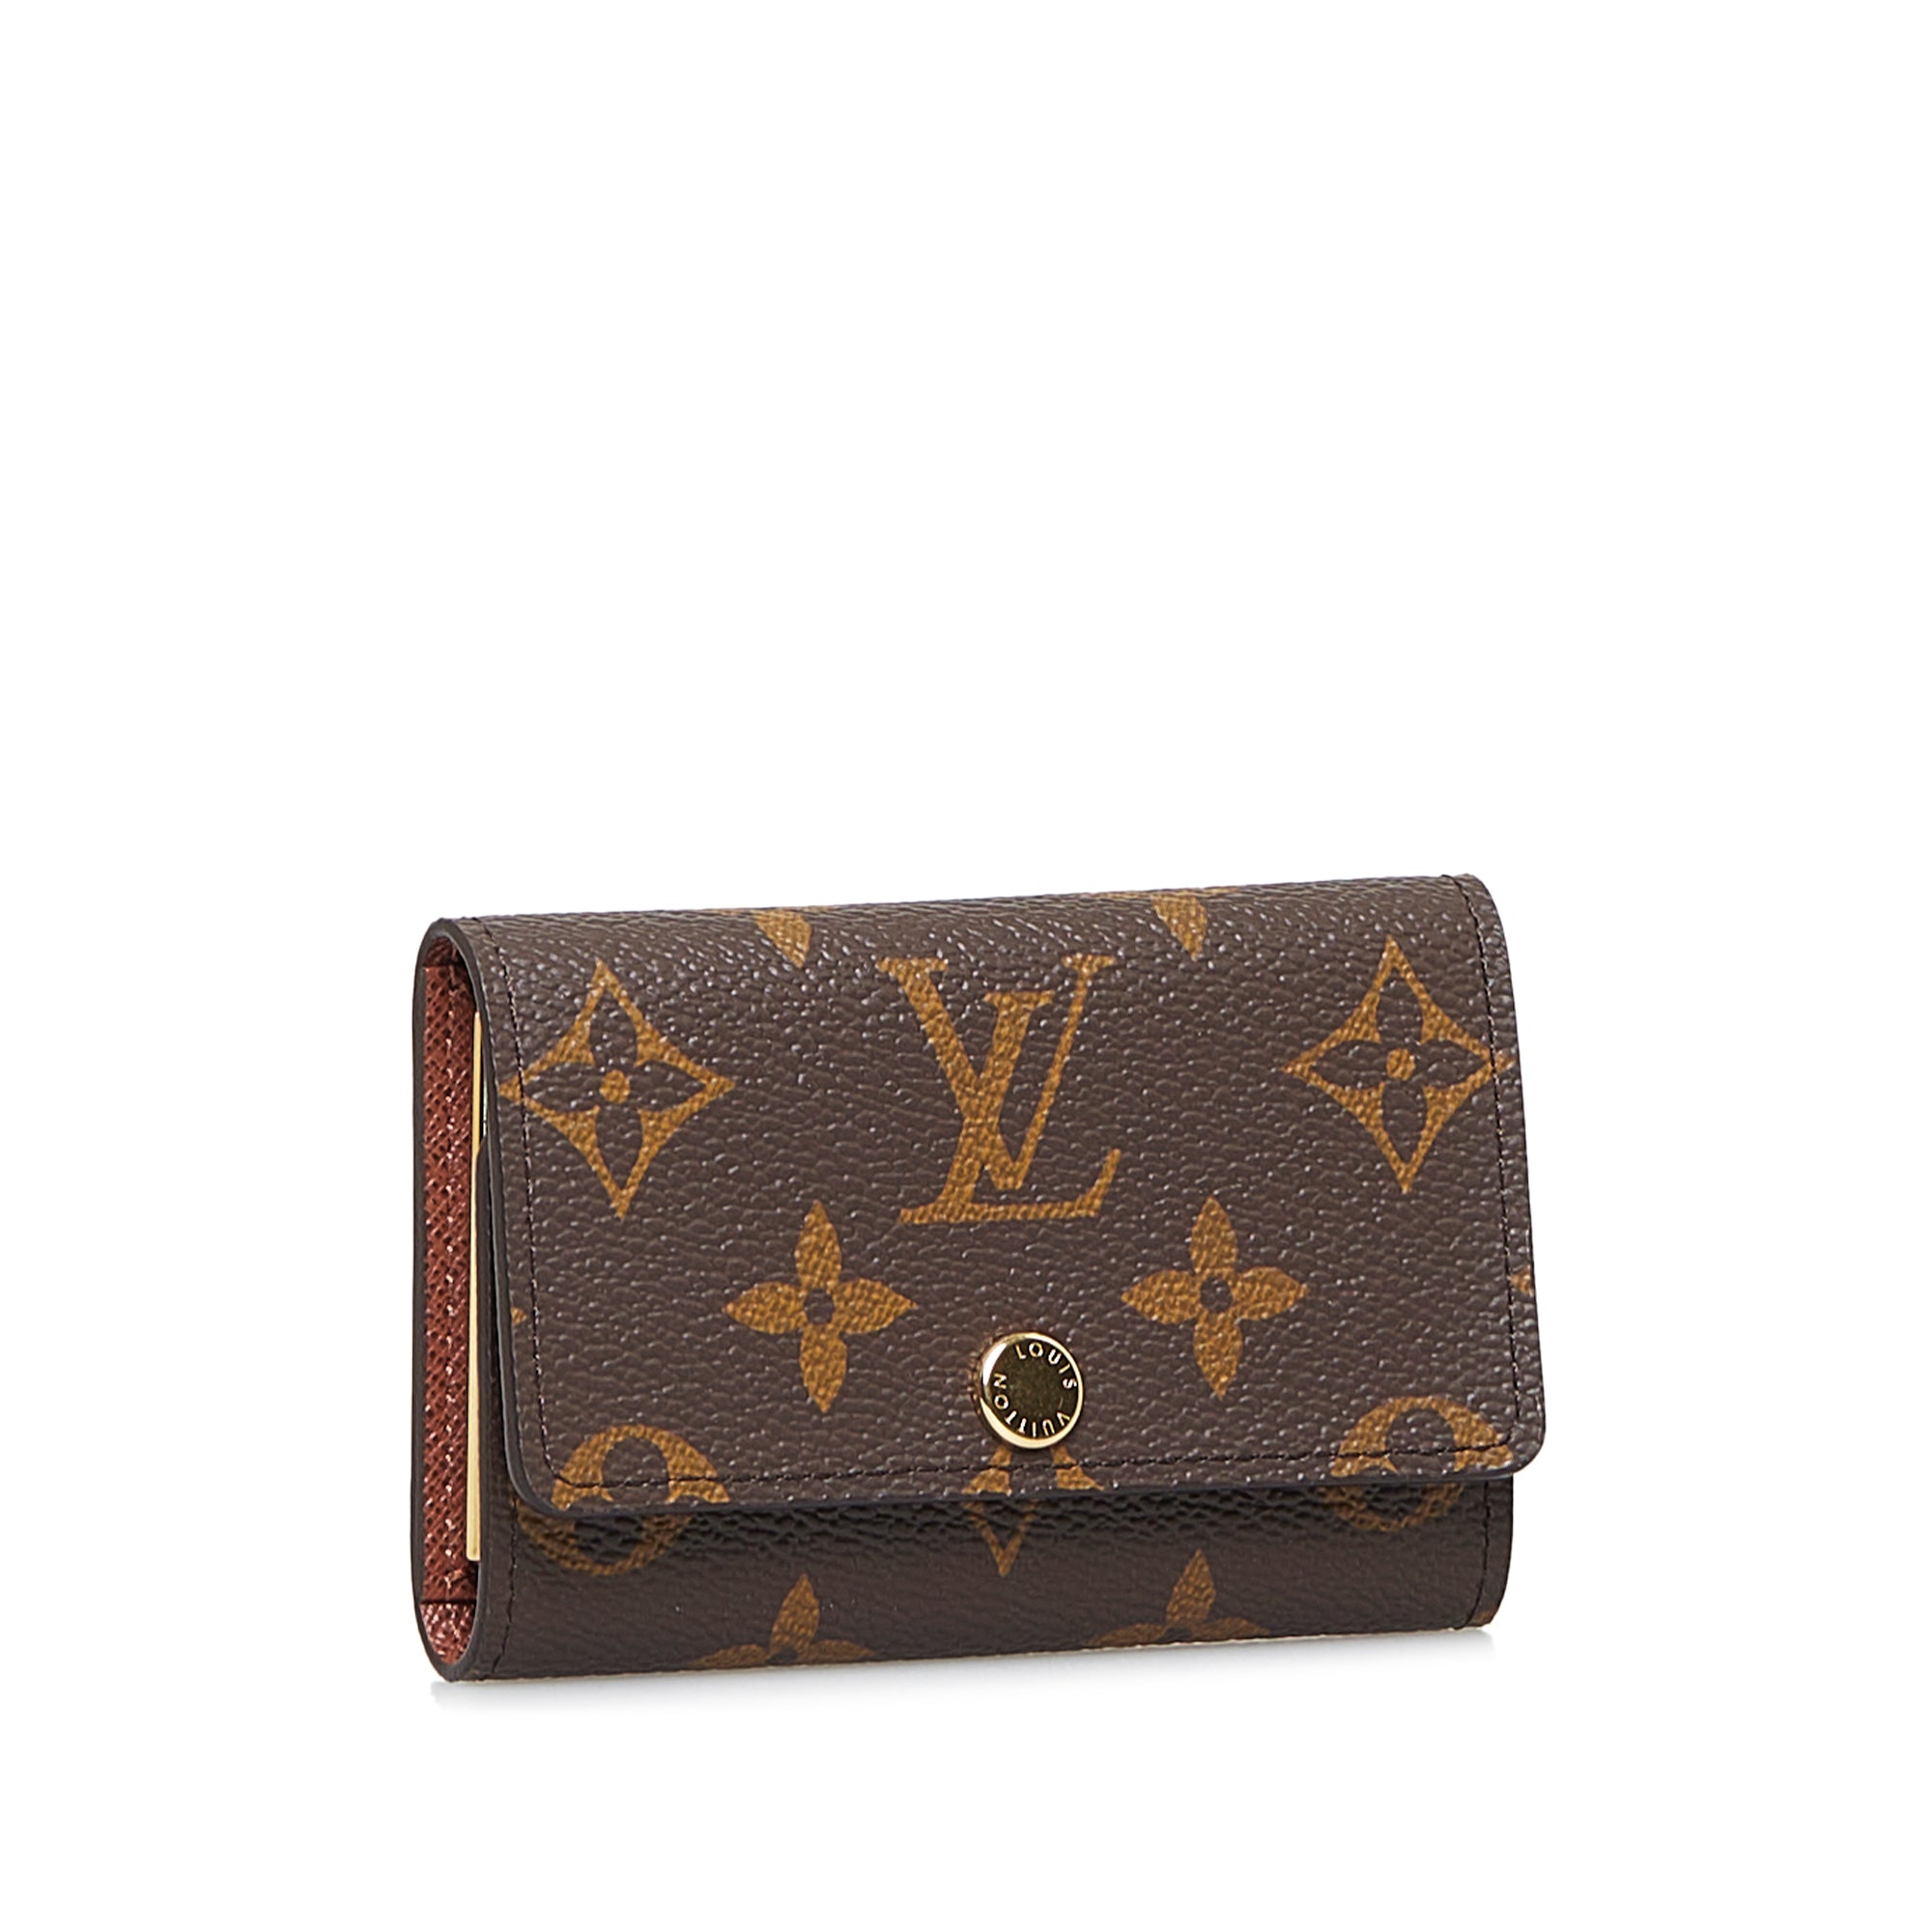 Spring Street Bag Charm and Key Holder  Luxury Key Holders and Bag Charms   Accessories  Women M69008  LOUIS VUITTON